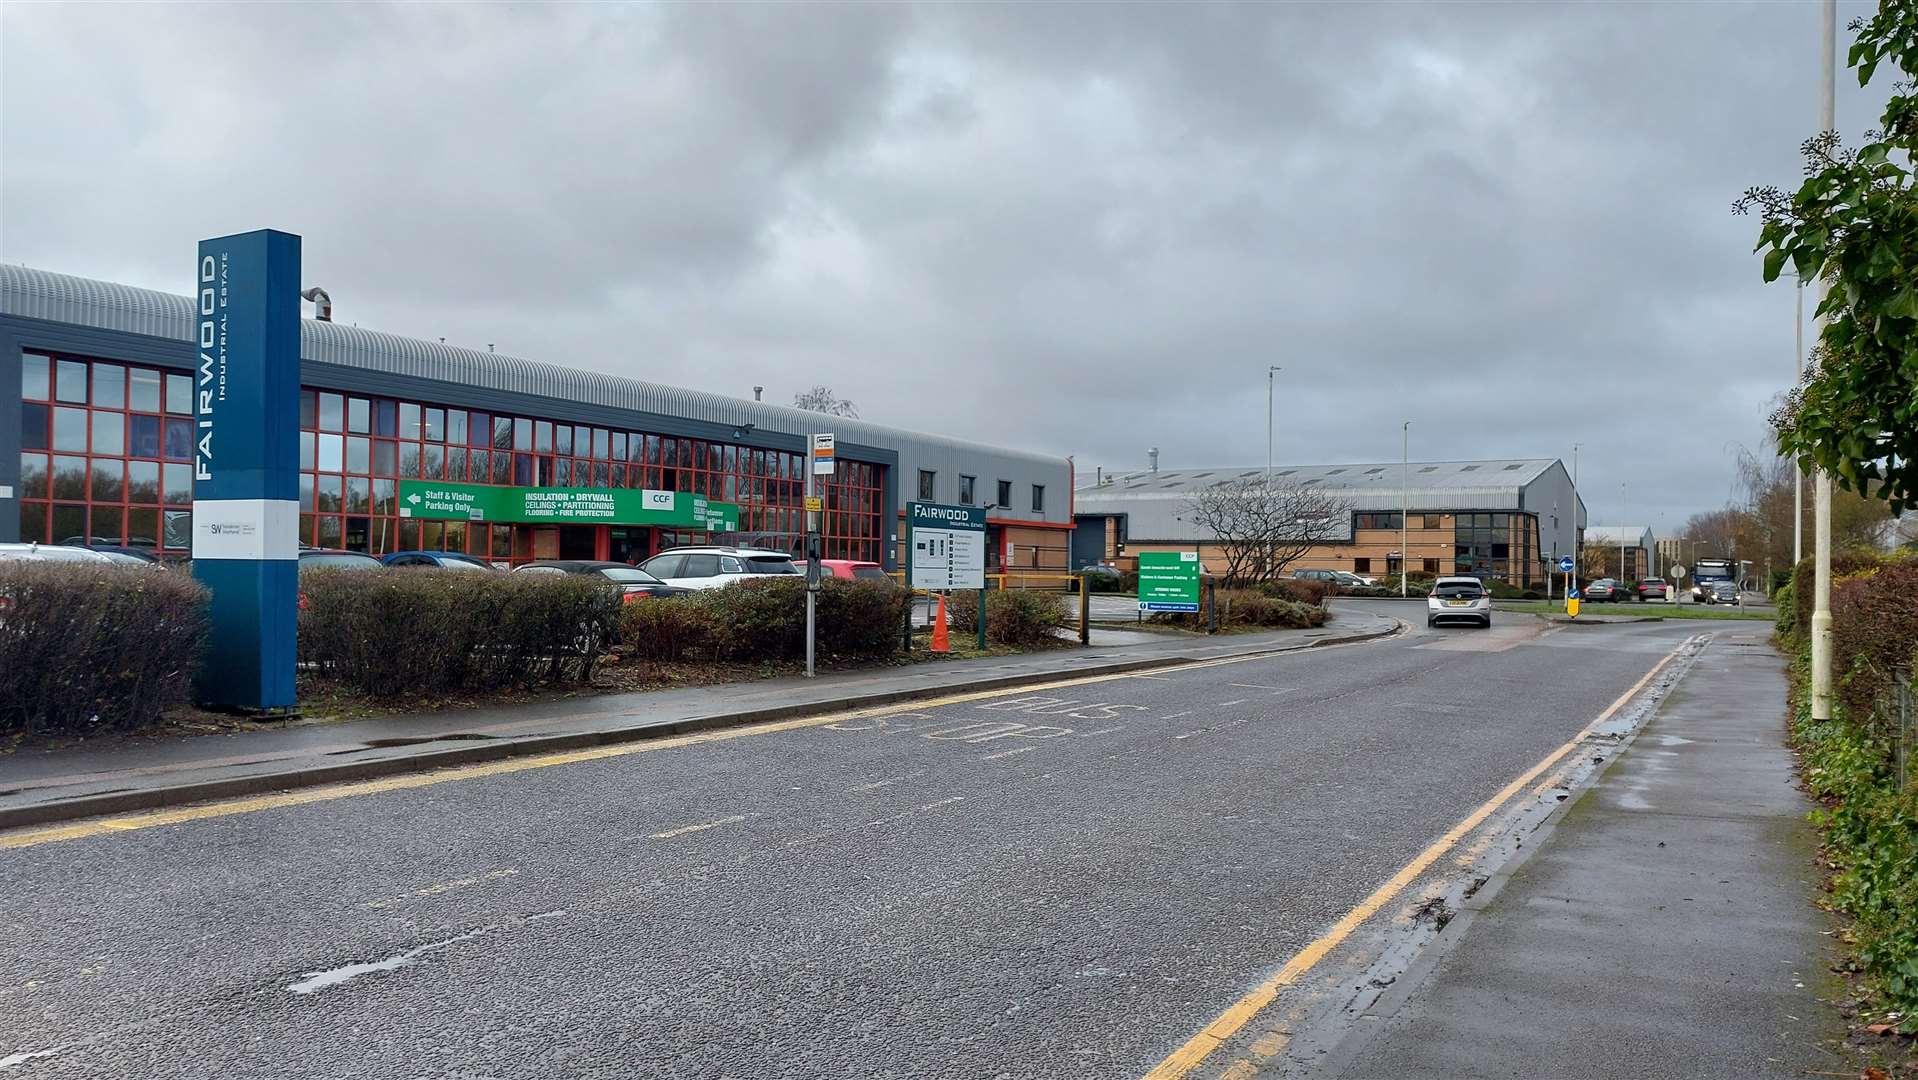 Leacon Road is made up of a number of industrial units which could soon fall under the PSPO